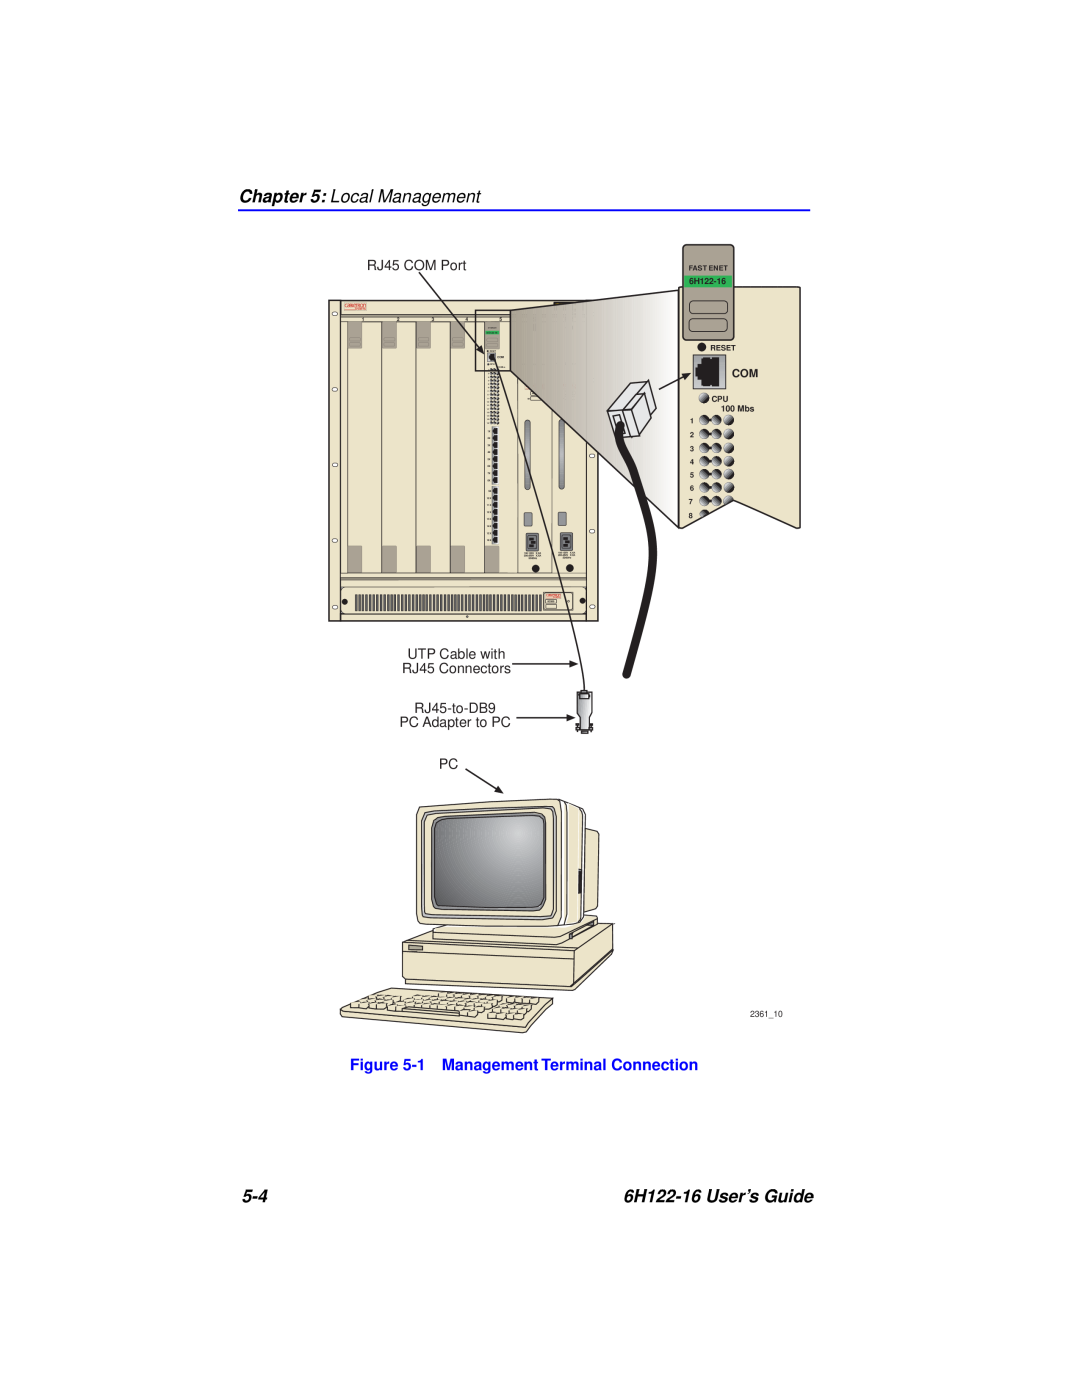 Cabletron Systems Local Management, 6H122-16 User’s Guide, 1 Management Terminal Connection, RJ45 COM Port, CPU 100 Mbs 